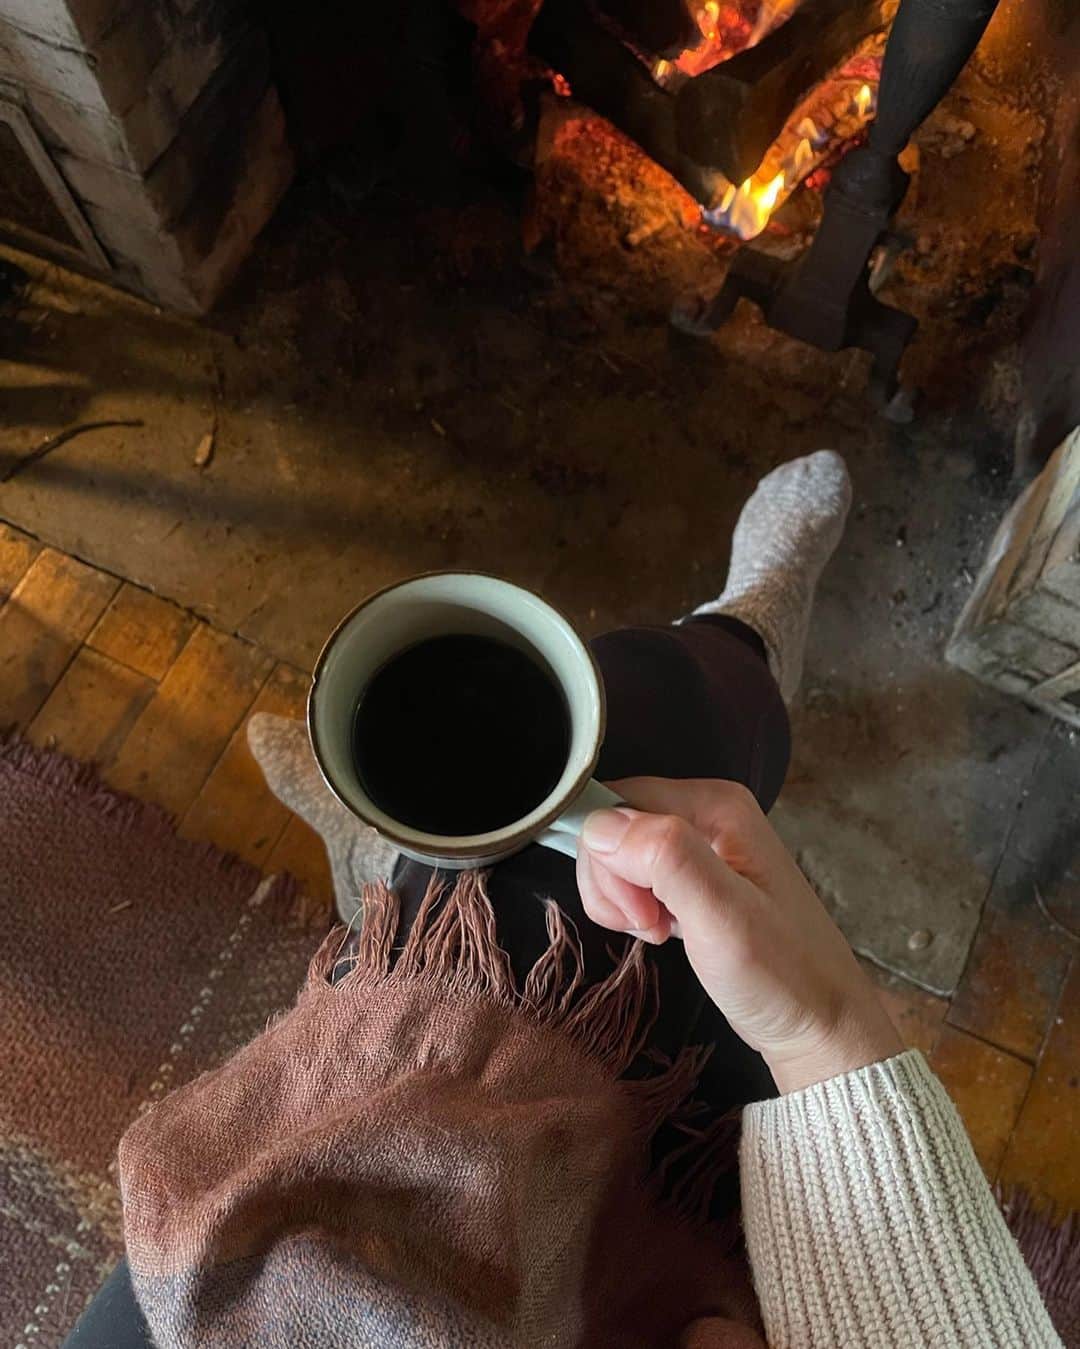 Kate Oliverのインスタグラム：「July, part 2   - Coffee by the fire on a drippy day. - It’s just getting better and better, the more grays and lines we get, and you can’t know it until you know it. You’ll think youth is everything until you get here and beyond.  - A in the drizzly wind! - Daily walks down to the water, no matter the weather. - Five eclairs for my 38th birthday (I shared)!  - Simple birthday dinner of steamed sole, beurre blanc, boiled potatoes with dill and butter and salt. - Impromptu rainy birthday swim — stripped down and jumped in!  - Tara took us skiing and we went to town after for some cones!  - West learned to swim this year! Last year she would stand as far out as she could touch and bark, too afraid to swim. Progress.  - Lots of time, just us, while our teen did her own thing. I wish we’d gotten that last summer of childhood (2020) up here, I feel like I got cheated of the final summer where she was still a kid. But having time as a couple is very sweet too — I’m always holding everything, it feels like. I miss what was, love what is, wonder how much more it’s going to change (it is).」